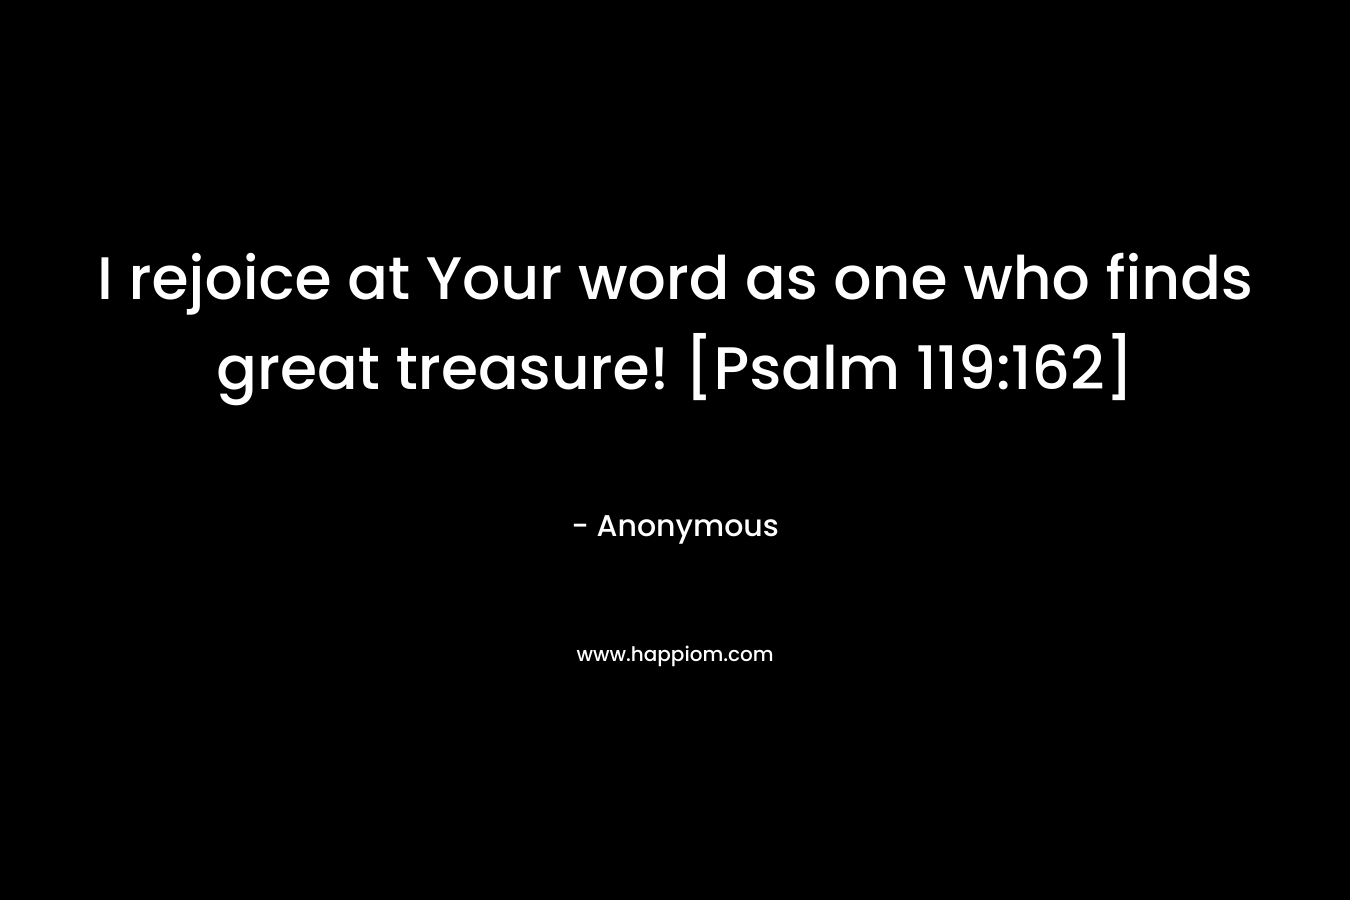 I rejoice at Your word as one who finds great treasure! [Psalm 119:162]